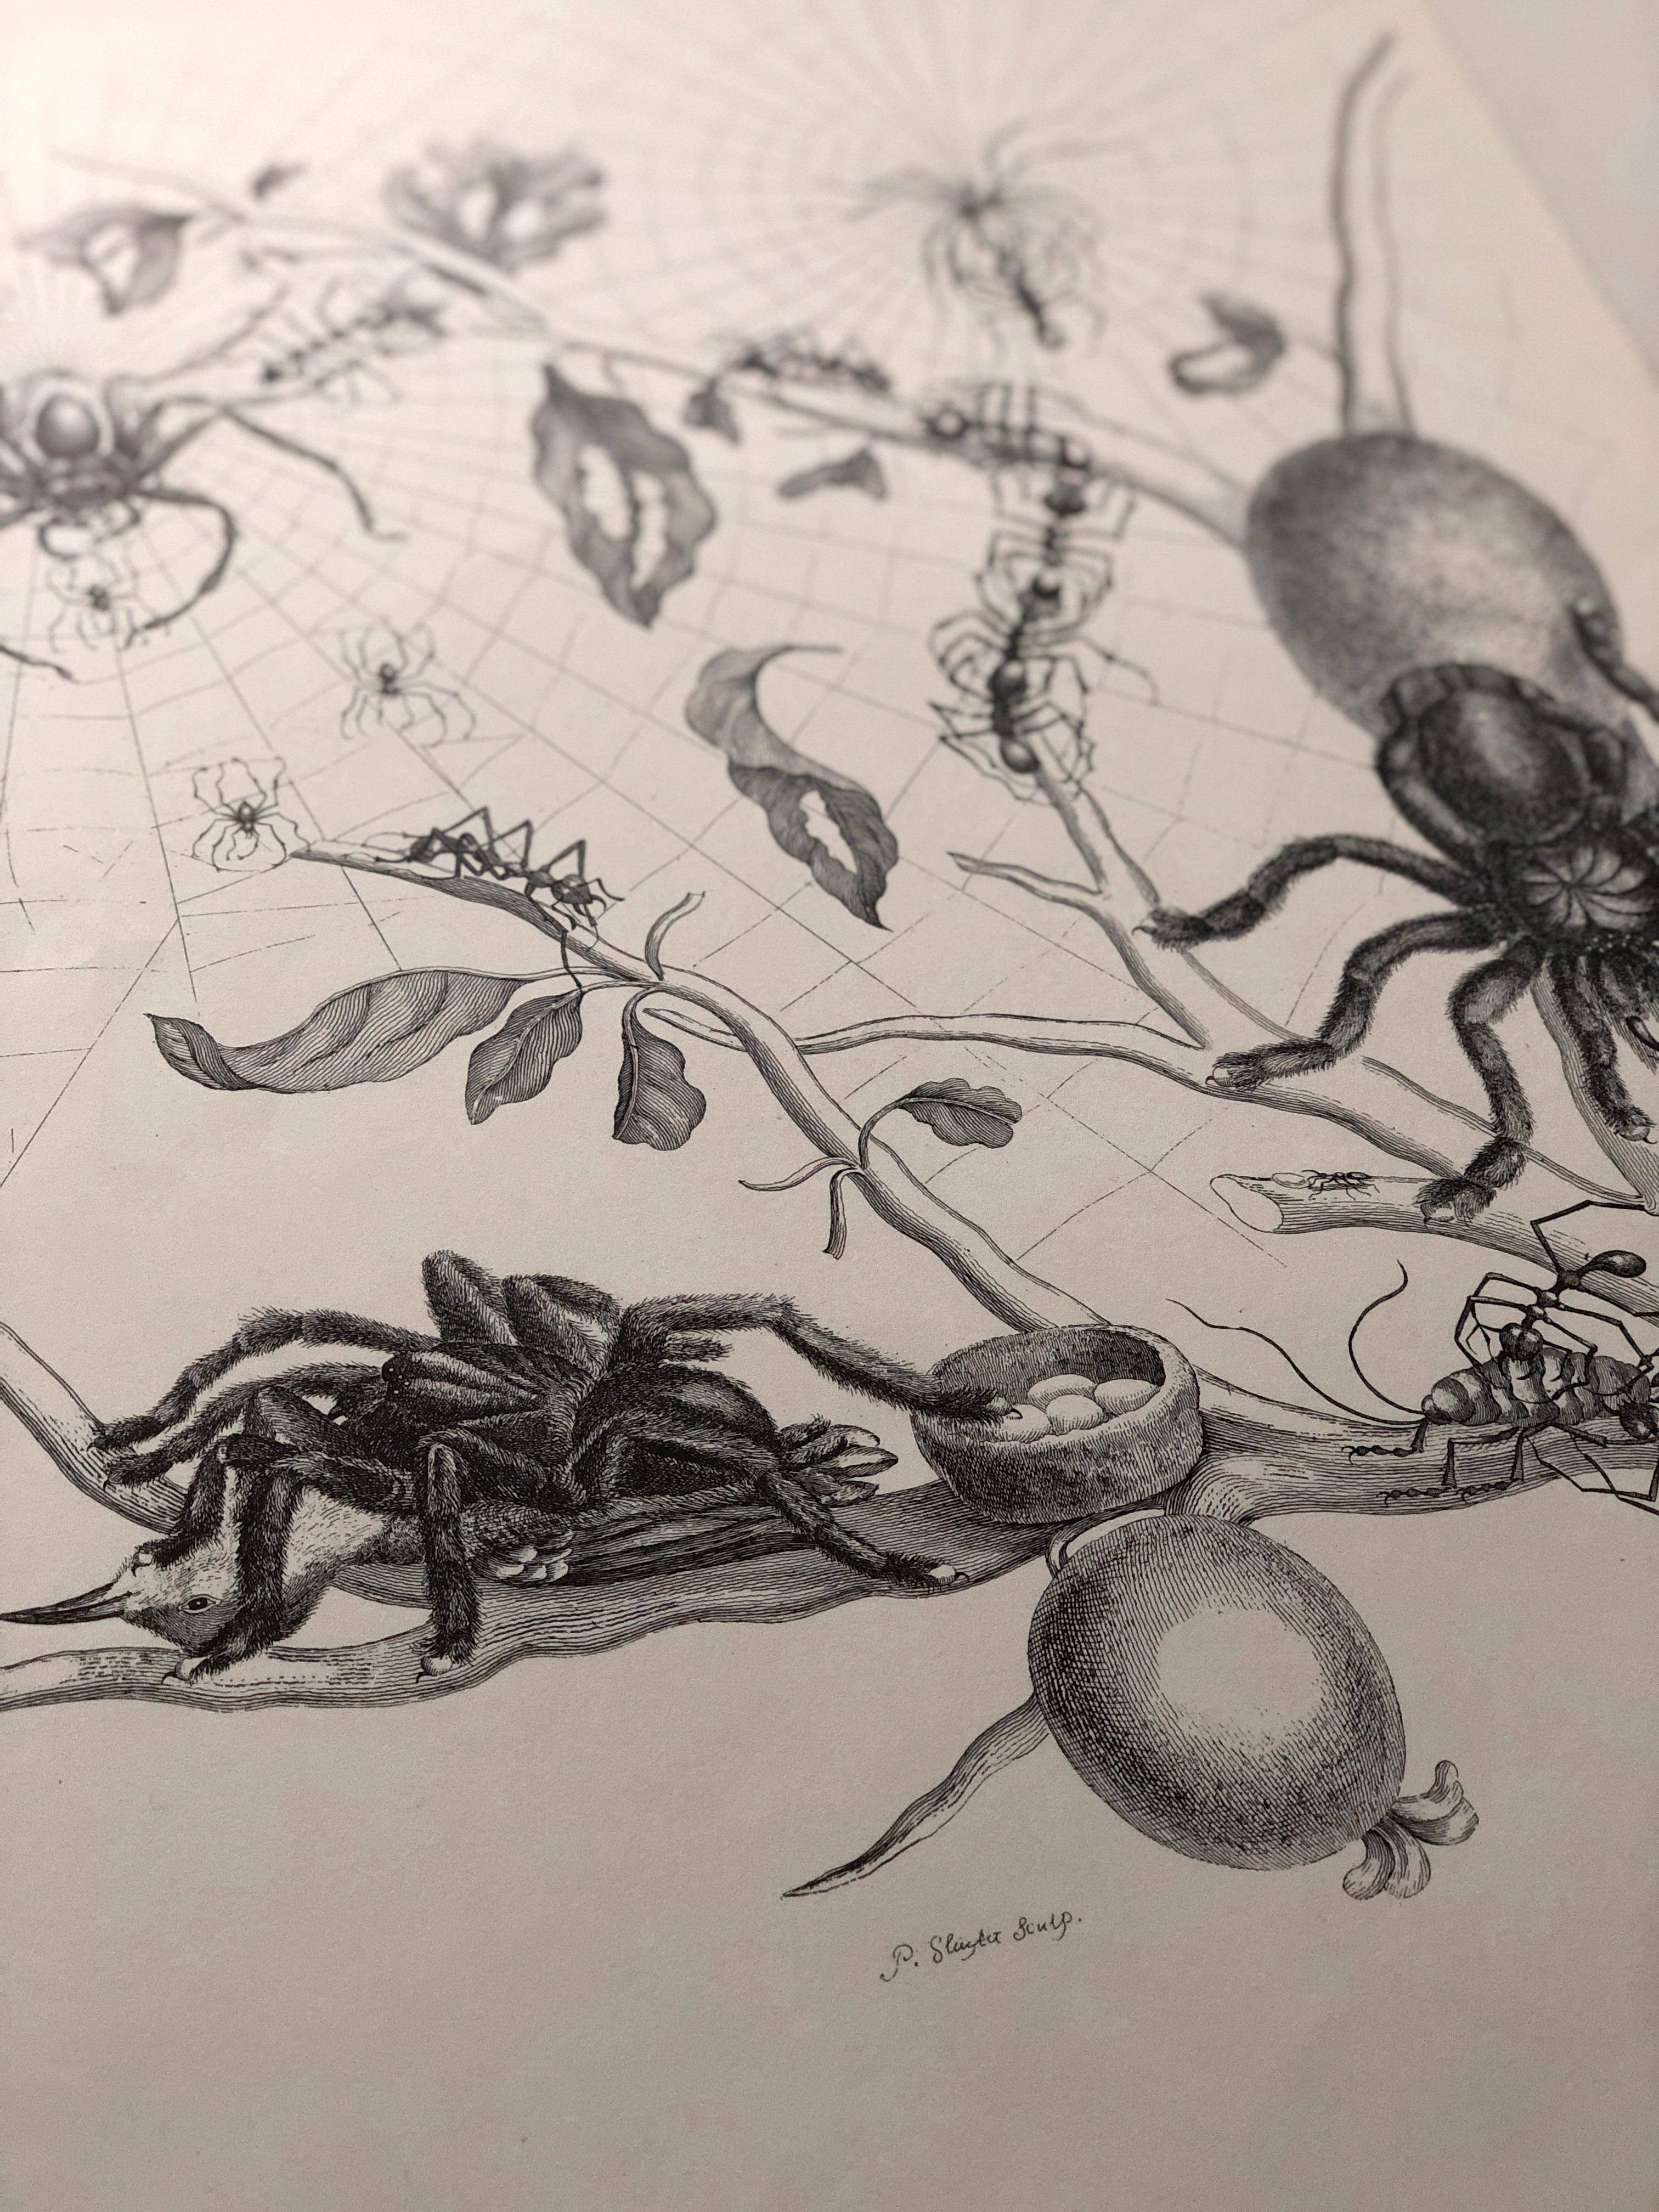 Maria Sibylla Merian - P. Sluyter Sculp - Guayave spiders and insects Nr. 18 For Sale 3